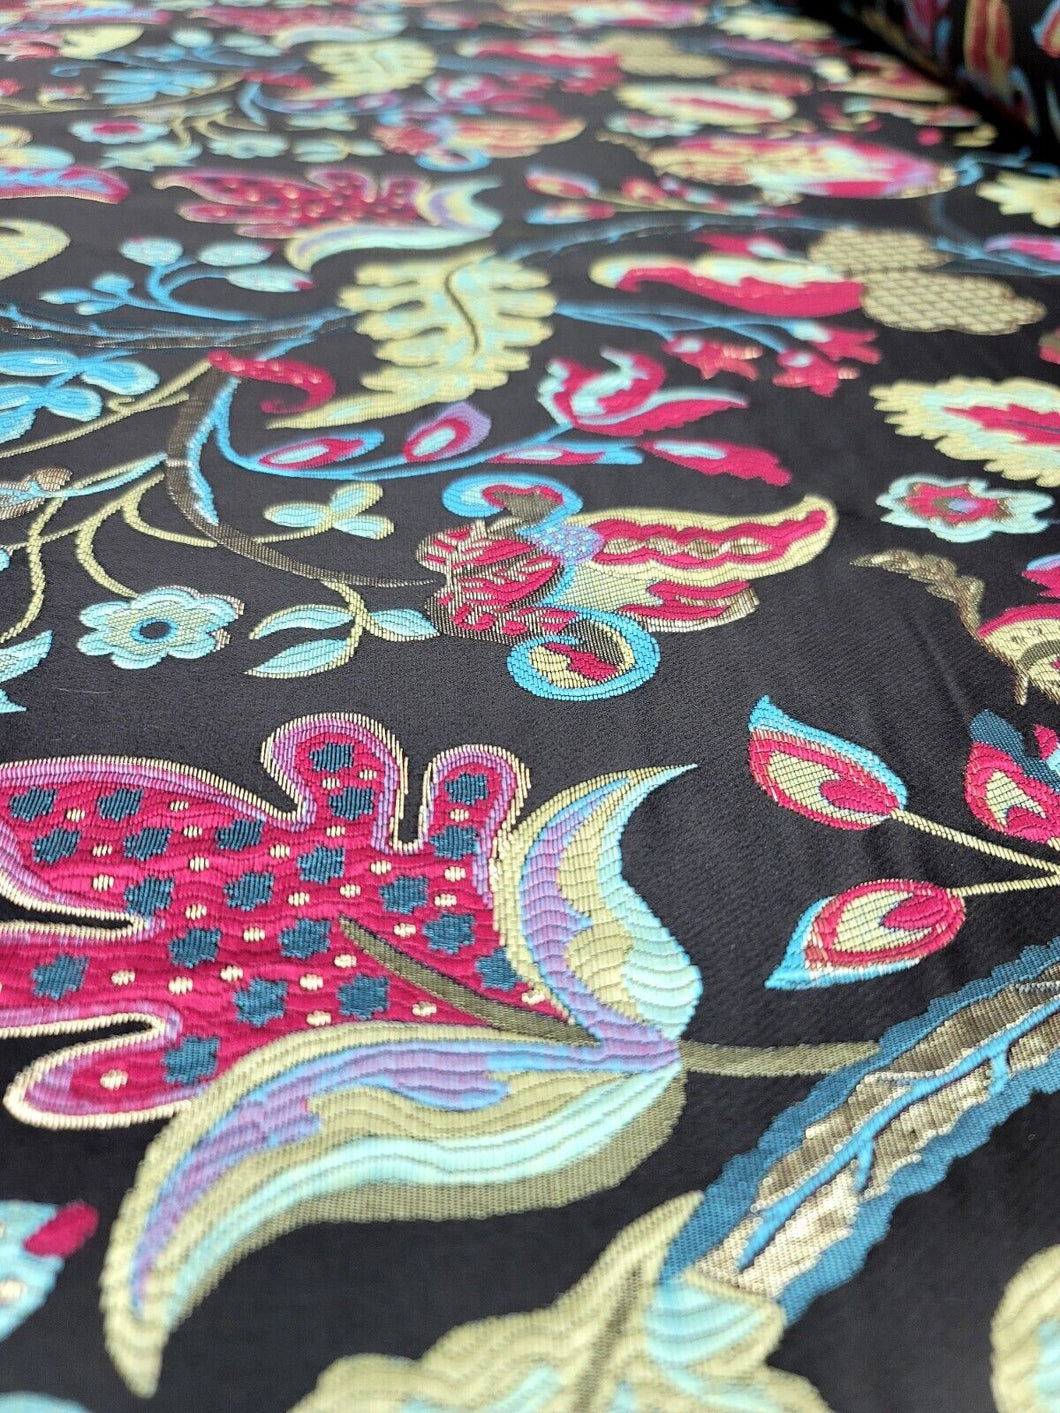 Fabric Sold By The Yard Black Brocade Multicolor Floral FUCHSIA BLUE GREEN